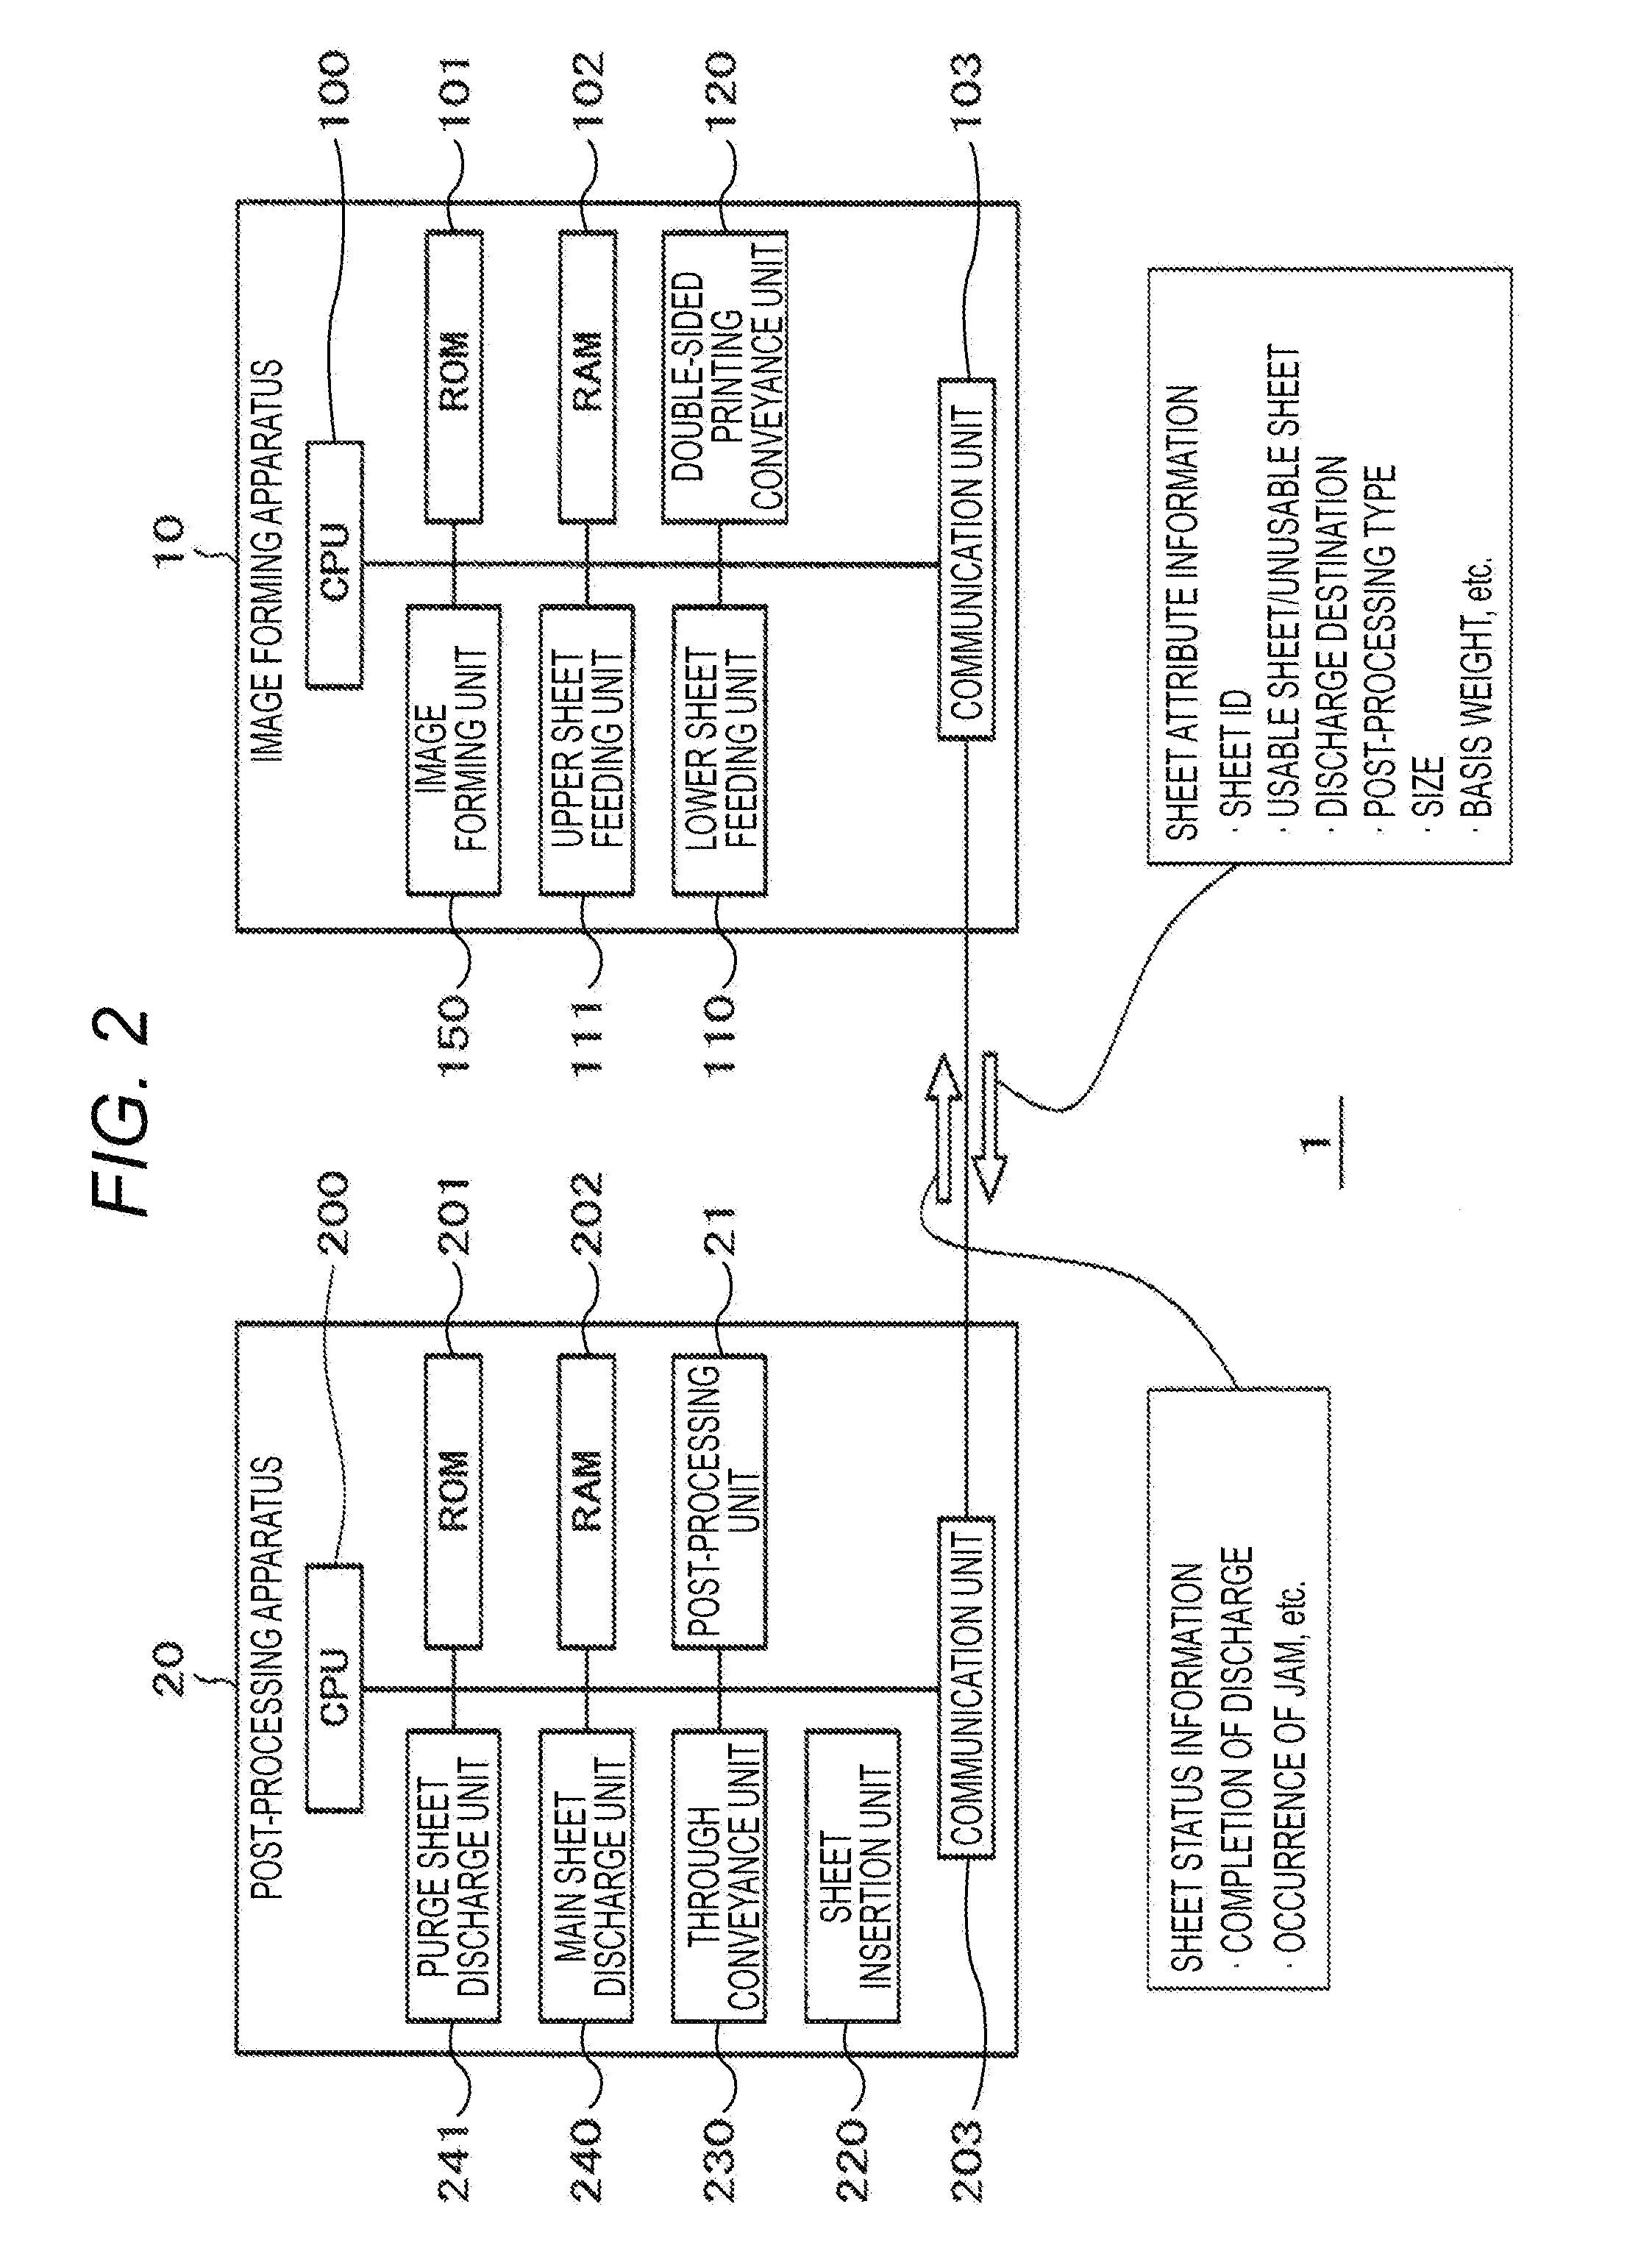 Image forming apparatus, method of forming image, and image forming system